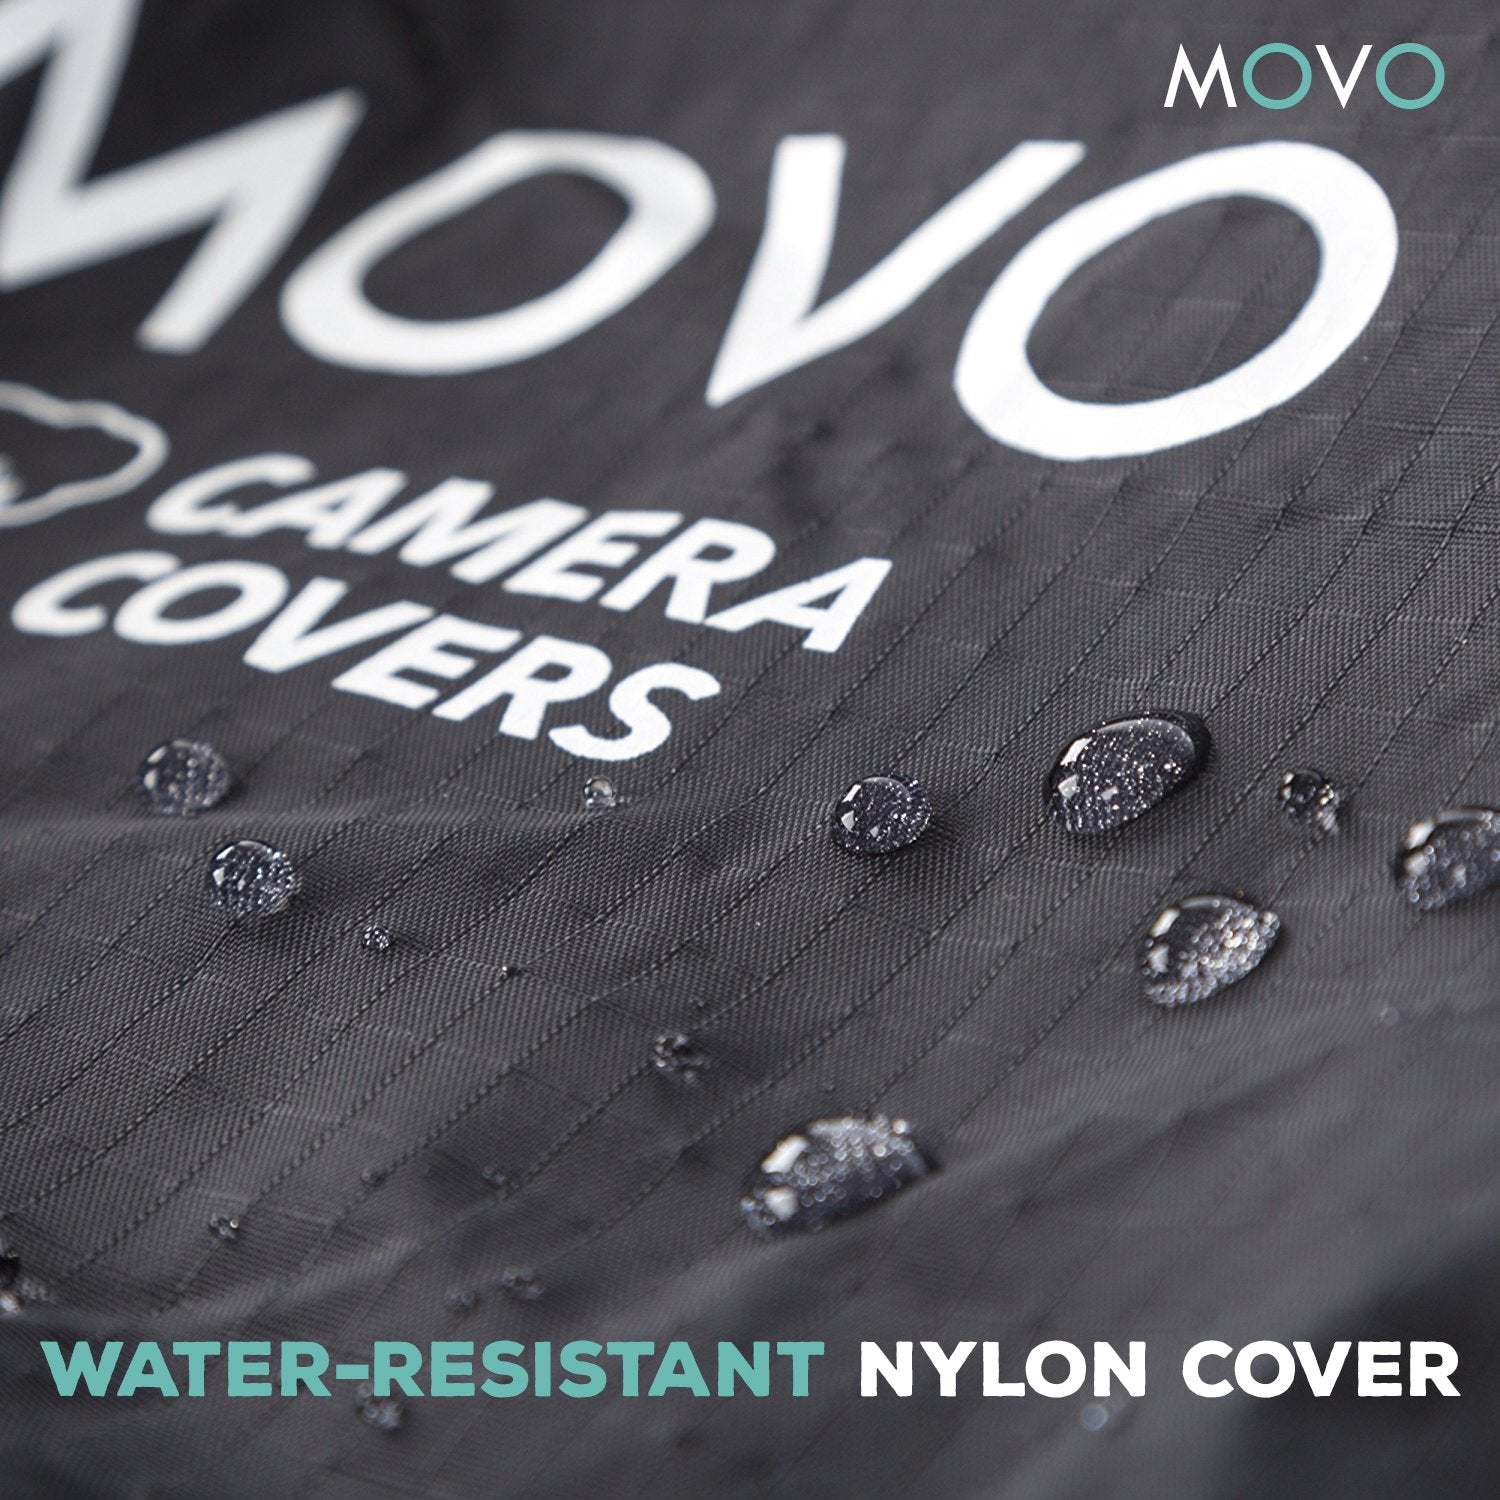 Movo CRC17 Storm Raincover Protector for DSLR Cameras, Lenses, Photographic Equipment (Small Size: 17 x 14.5)  - Like New